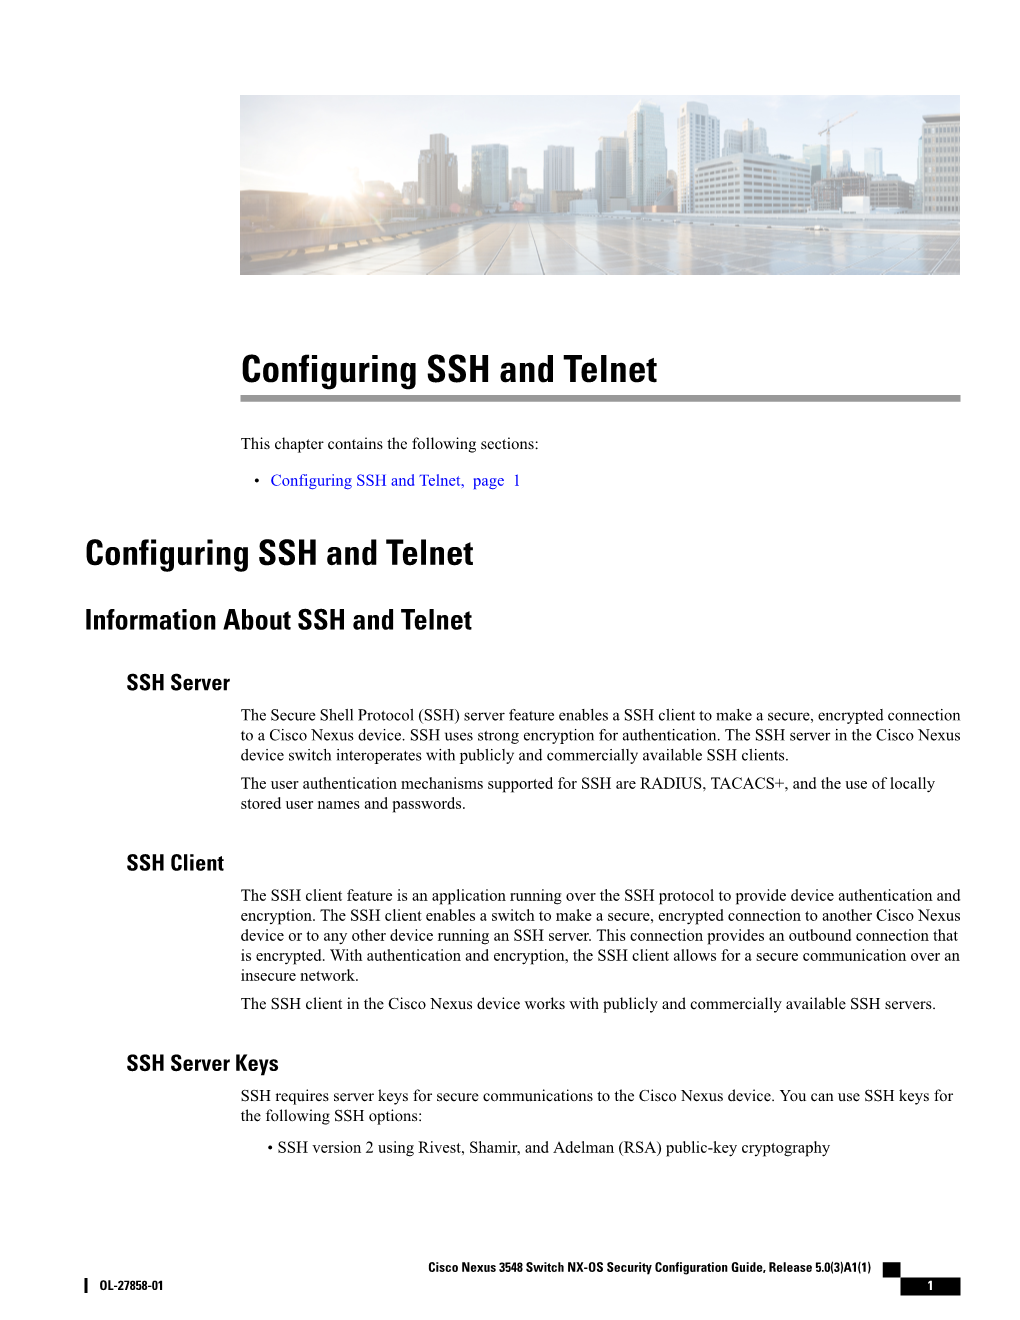 Configuring SSH and Telnet, Page 1